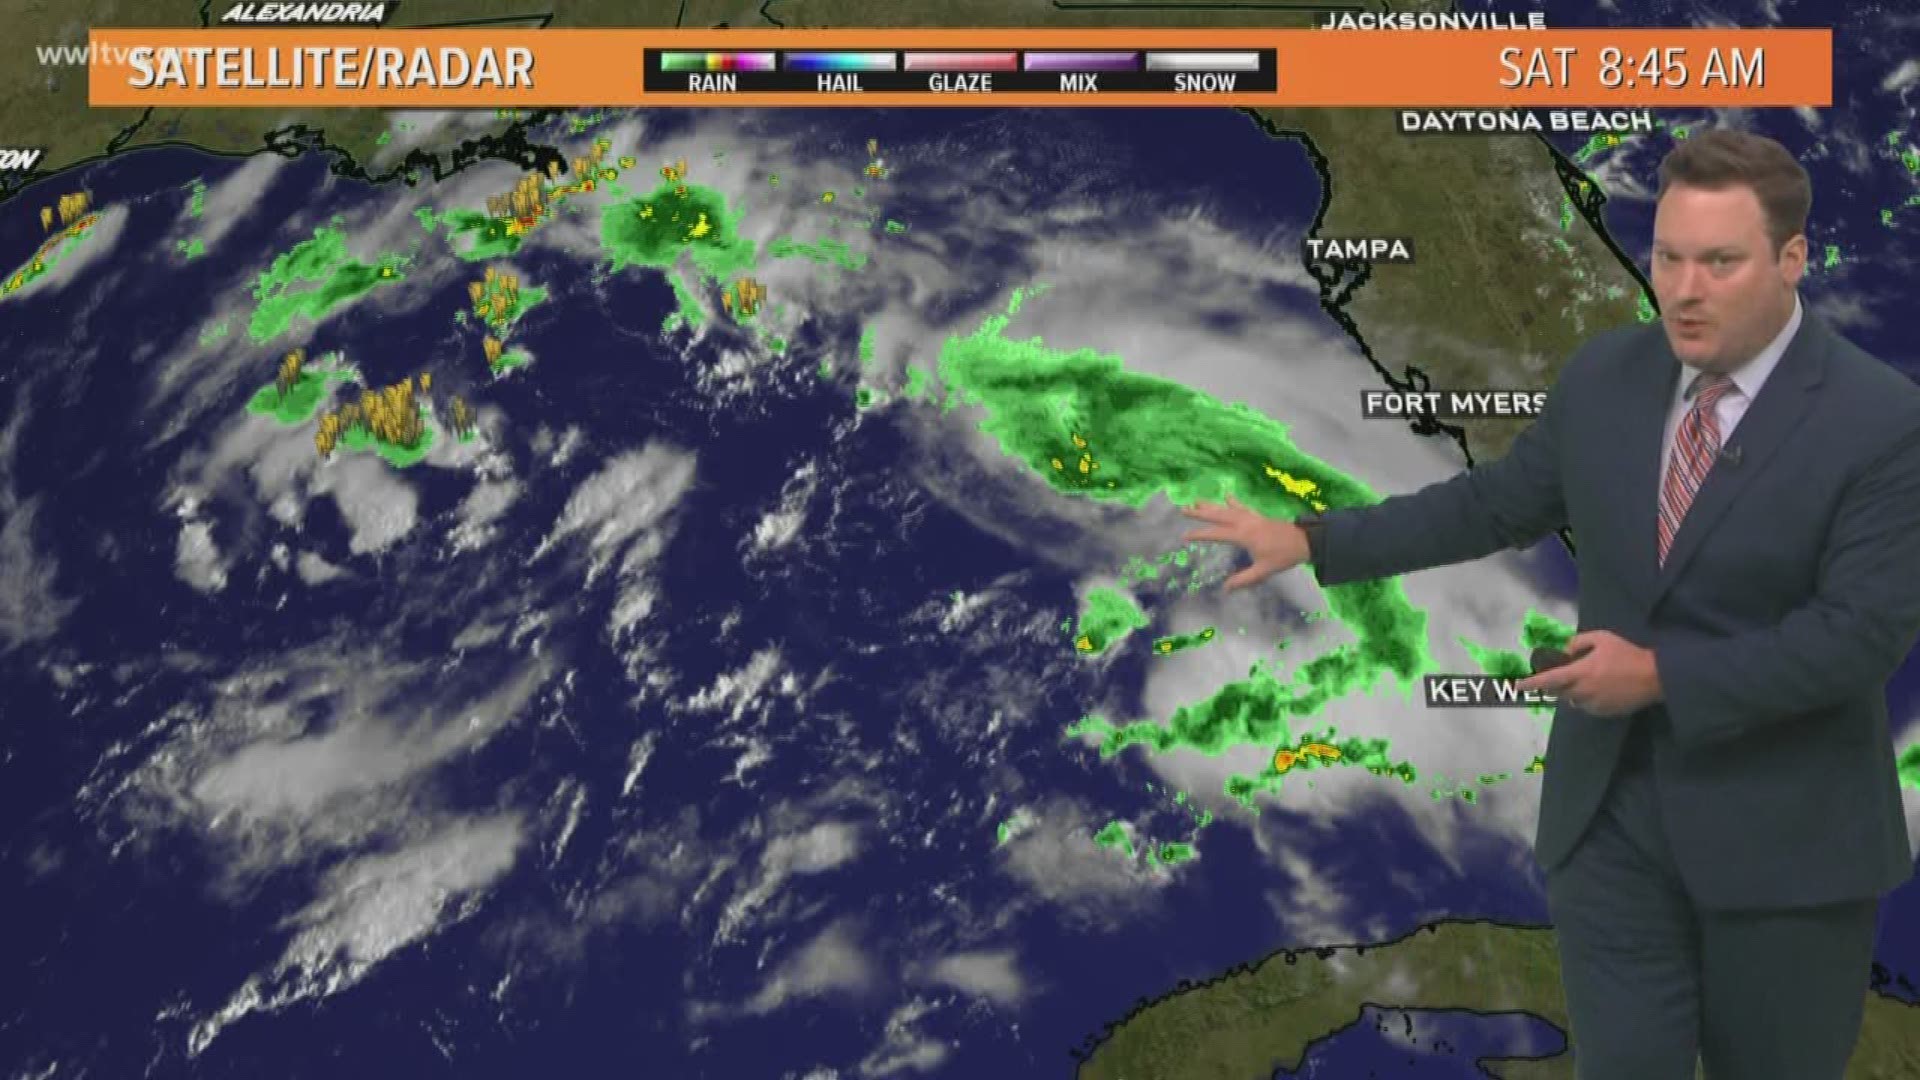 Tropical Storm Humberto will begin moving away from the East coast later early next week with a close watch now on a disturbance in the Gulf. Meteorologist Chris Franklin has a detailed analysis on the potential for Gulf development.